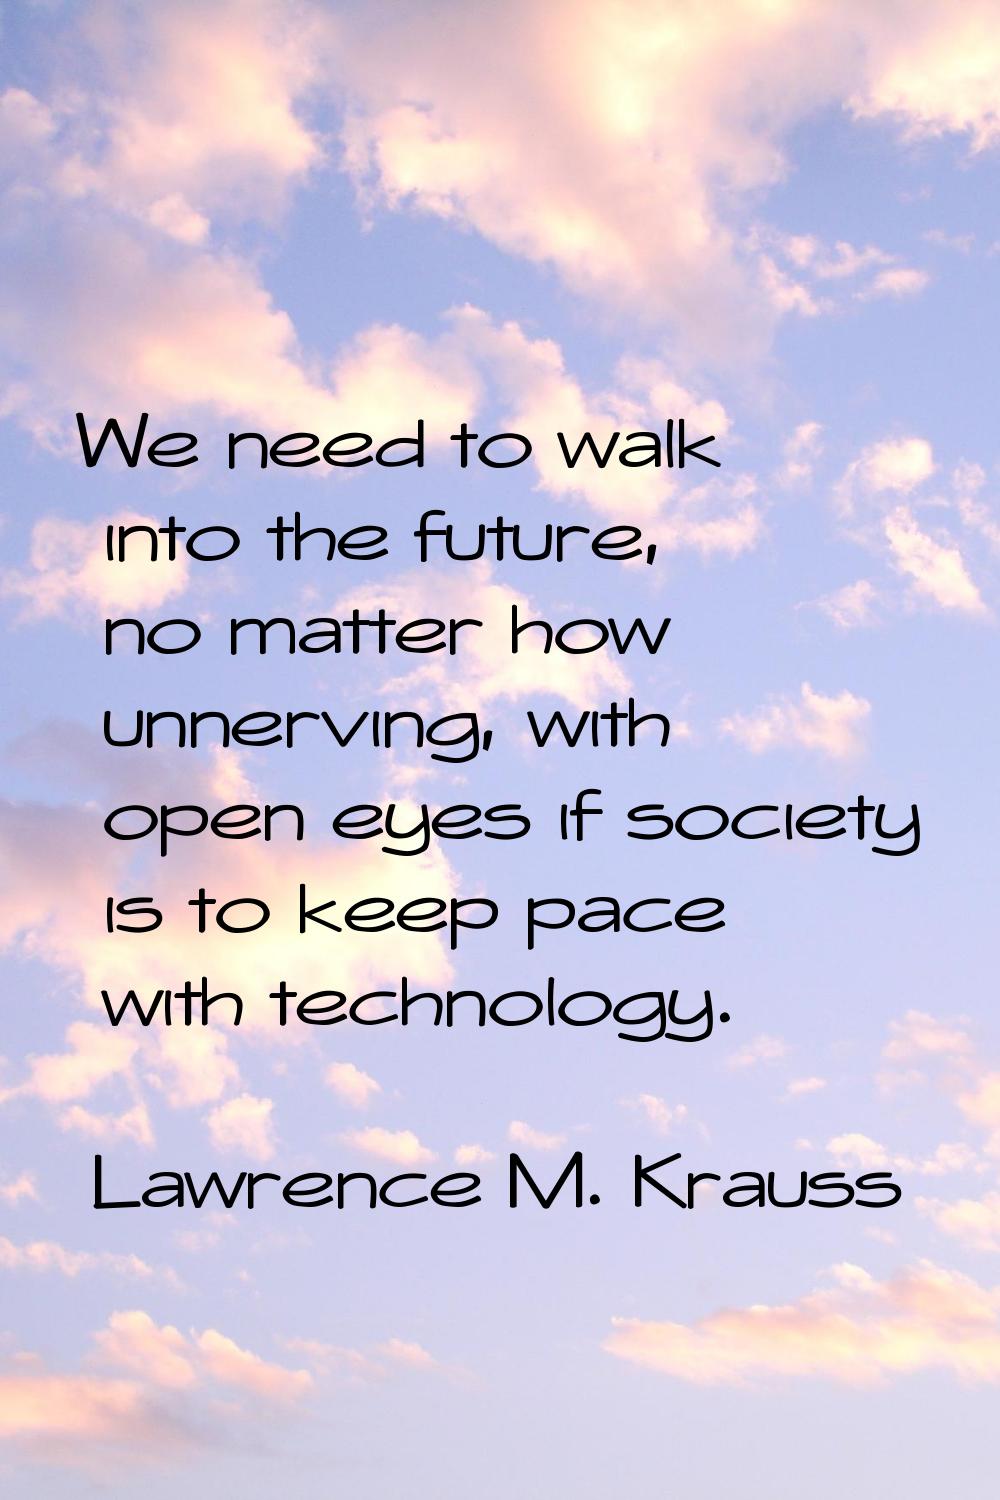 We need to walk into the future, no matter how unnerving, with open eyes if society is to keep pace